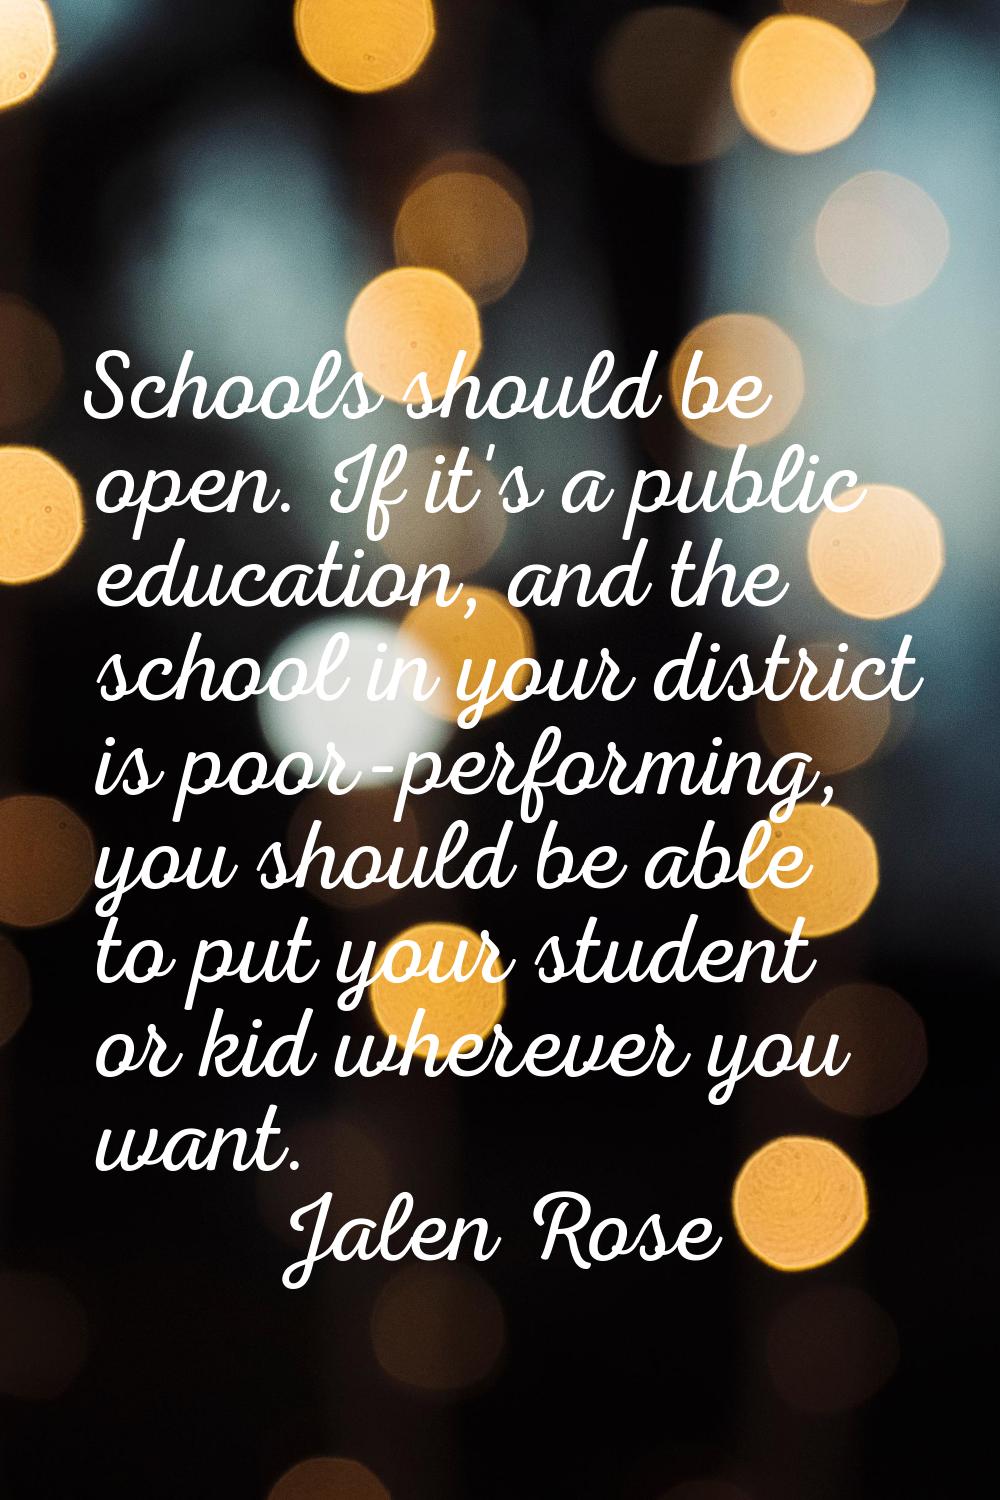 Schools should be open. If it's a public education, and the school in your district is poor-perform